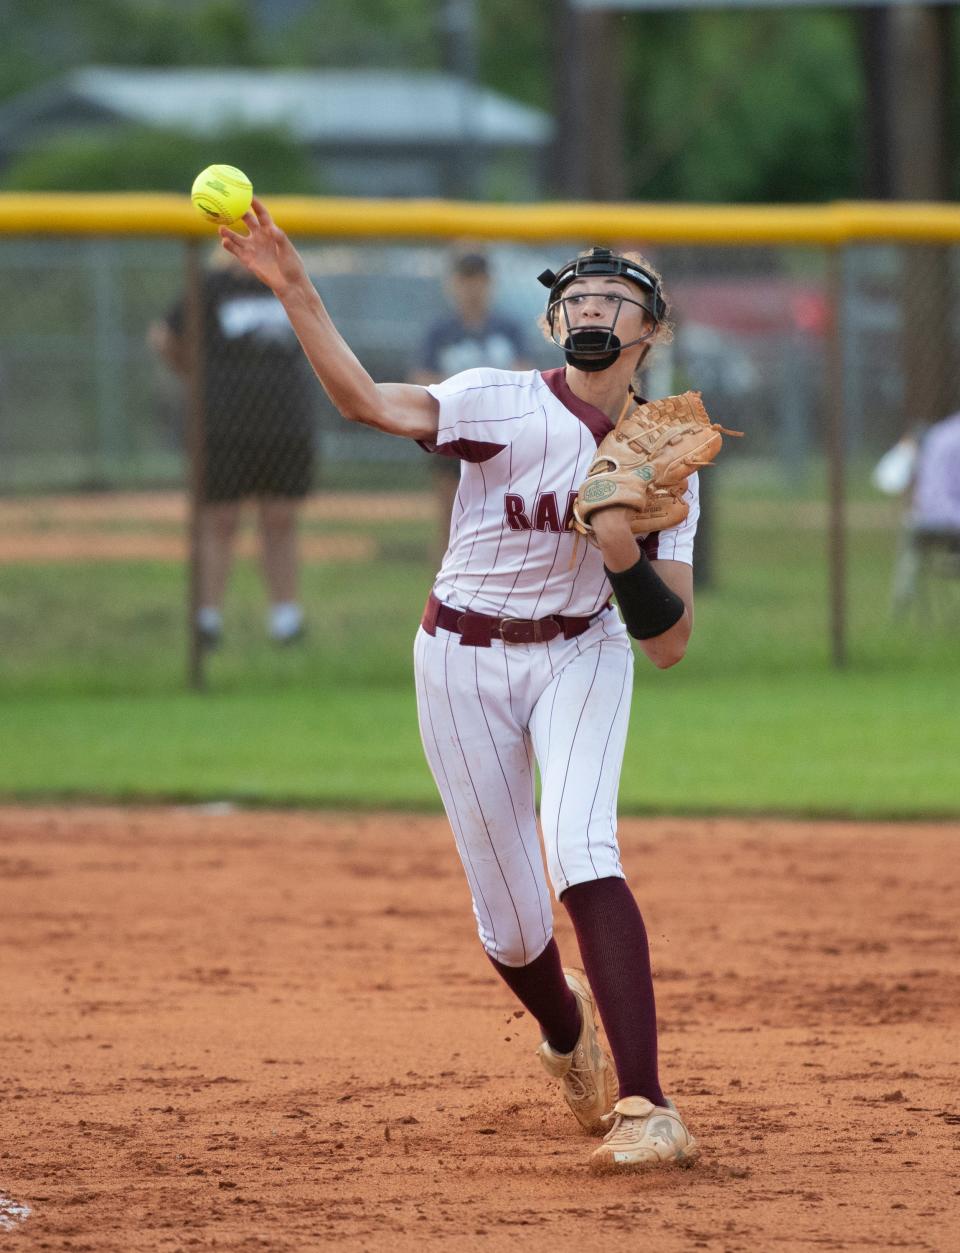 Shortstop Harmony  Stafford (3) throws to first for an out during the Gulf Breeze vs Navarre softball game at Navarre High School on Tuesday, April 26, 2022.